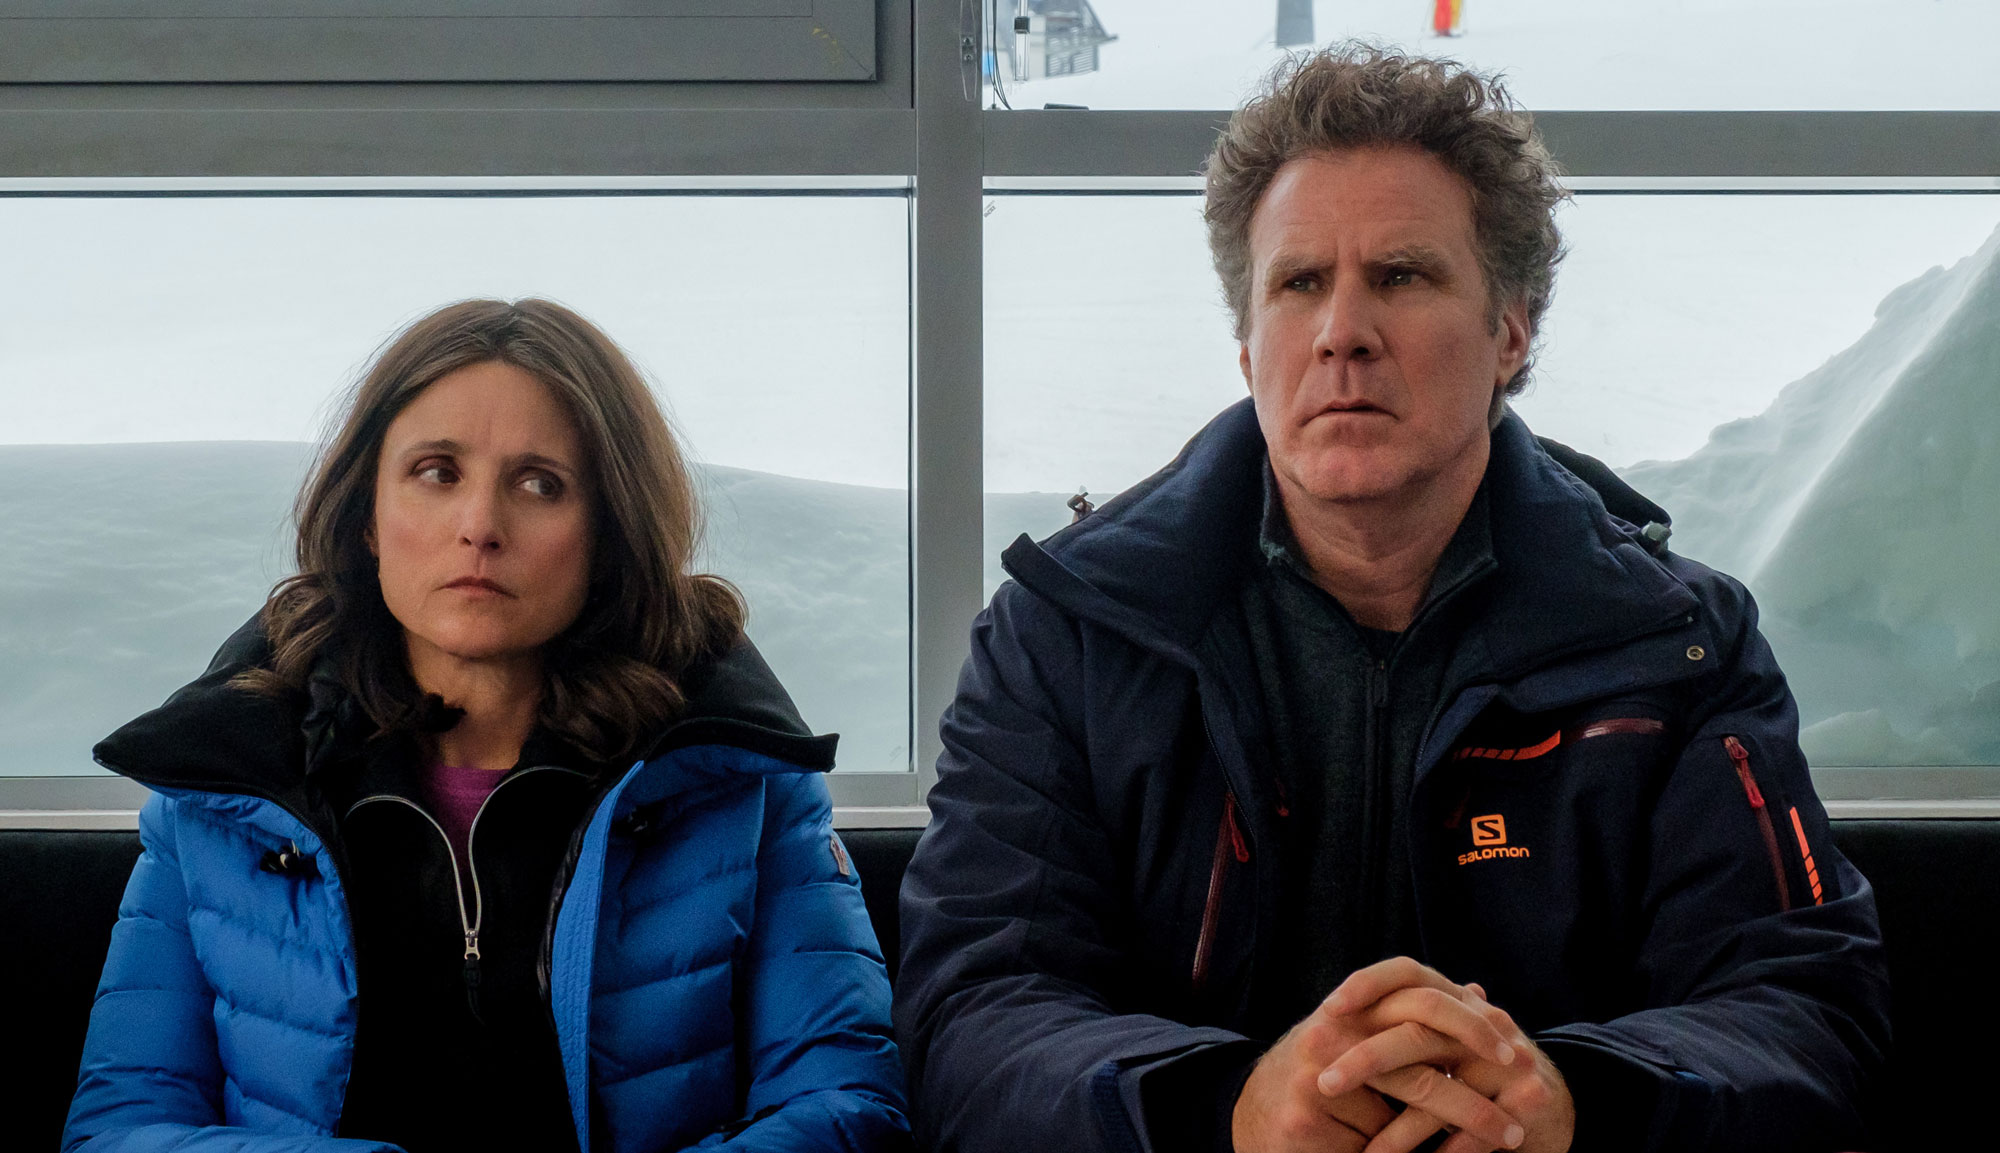 Will Ferrell and Julia Louis-Dreyfus in "Downhill"